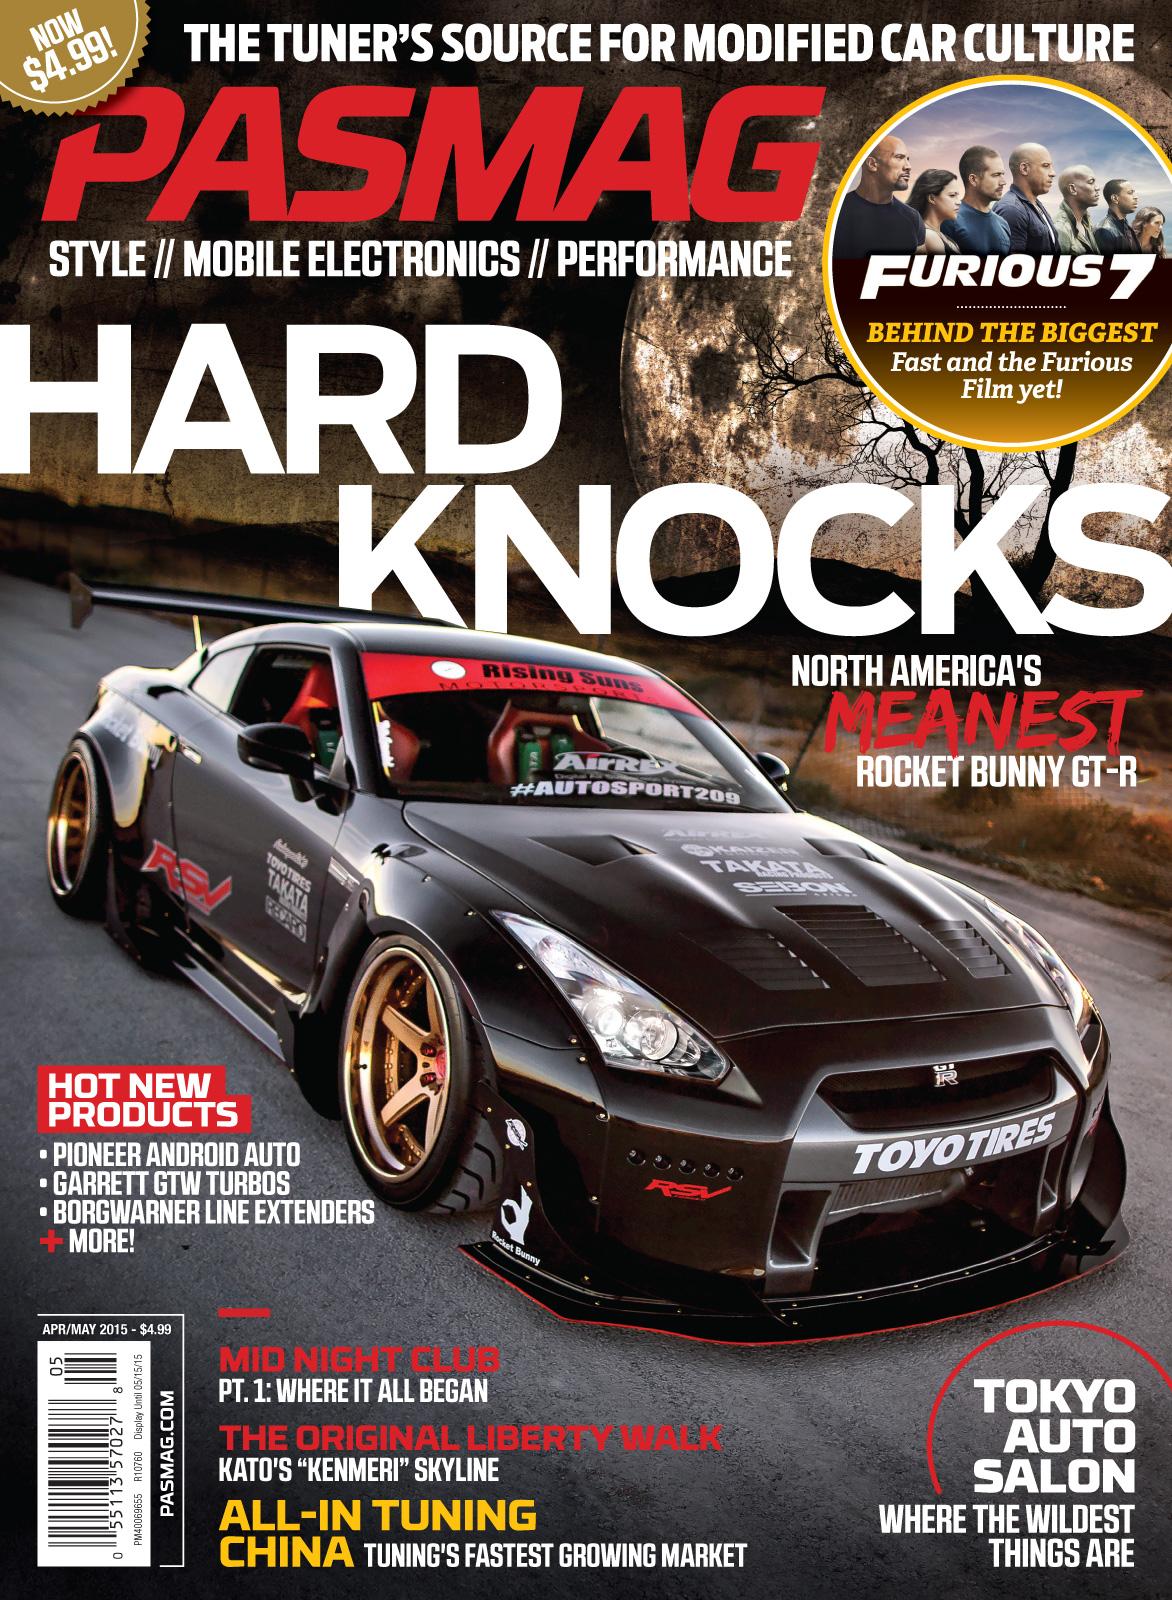 PASMAG Announces the IFO 2014 National Champions! Team Hybrid!